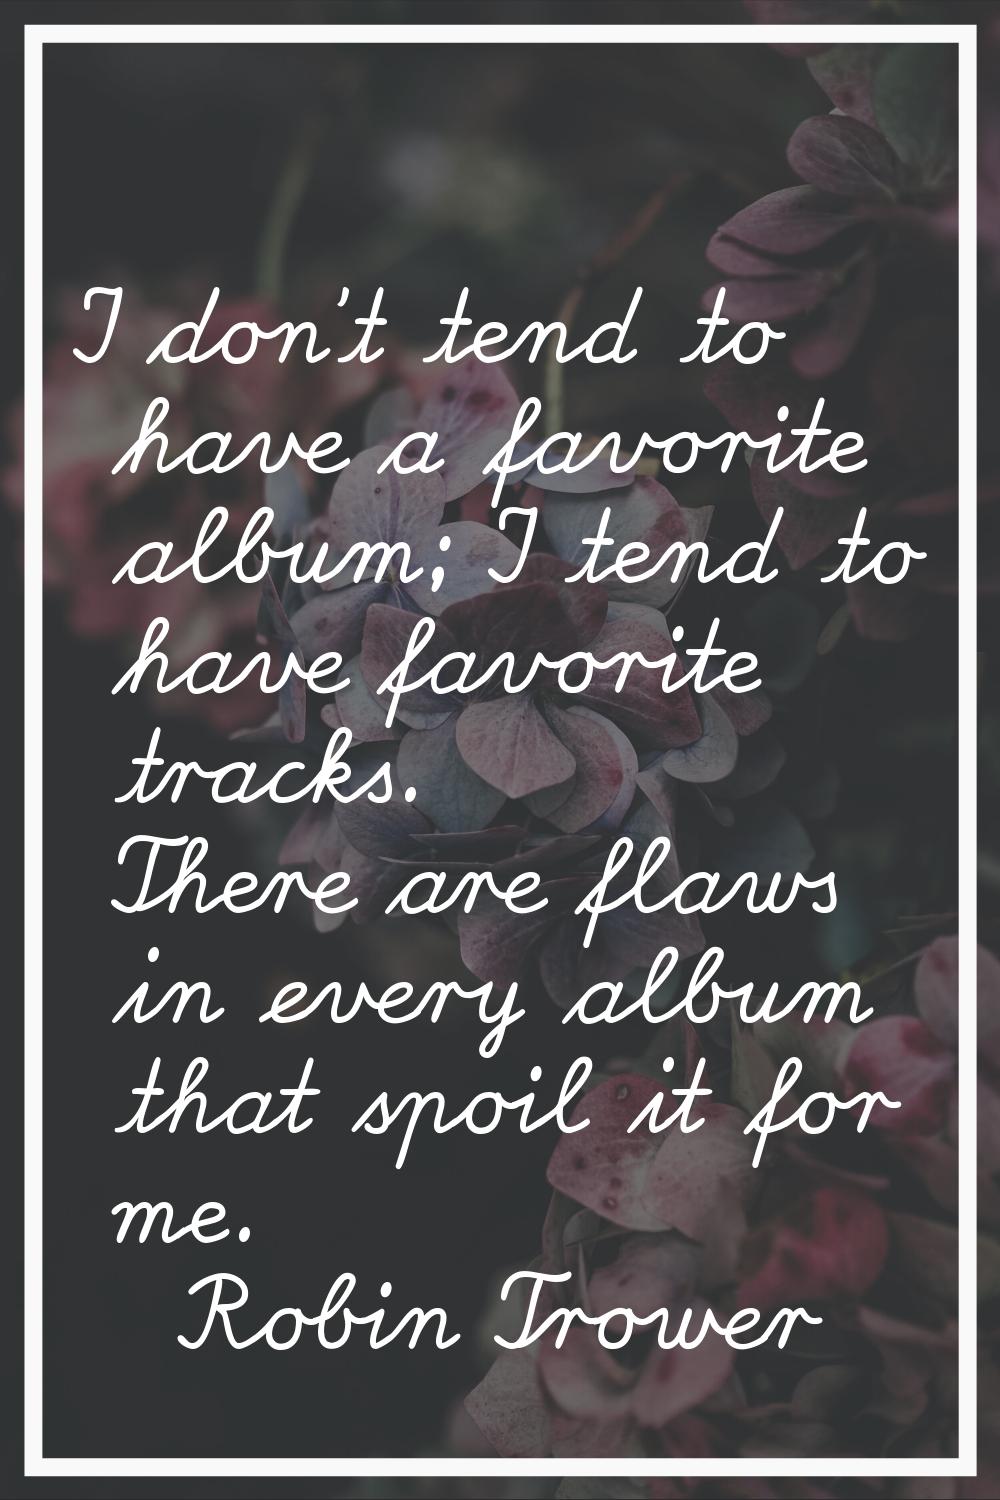 I don't tend to have a favorite album; I tend to have favorite tracks. There are flaws in every alb